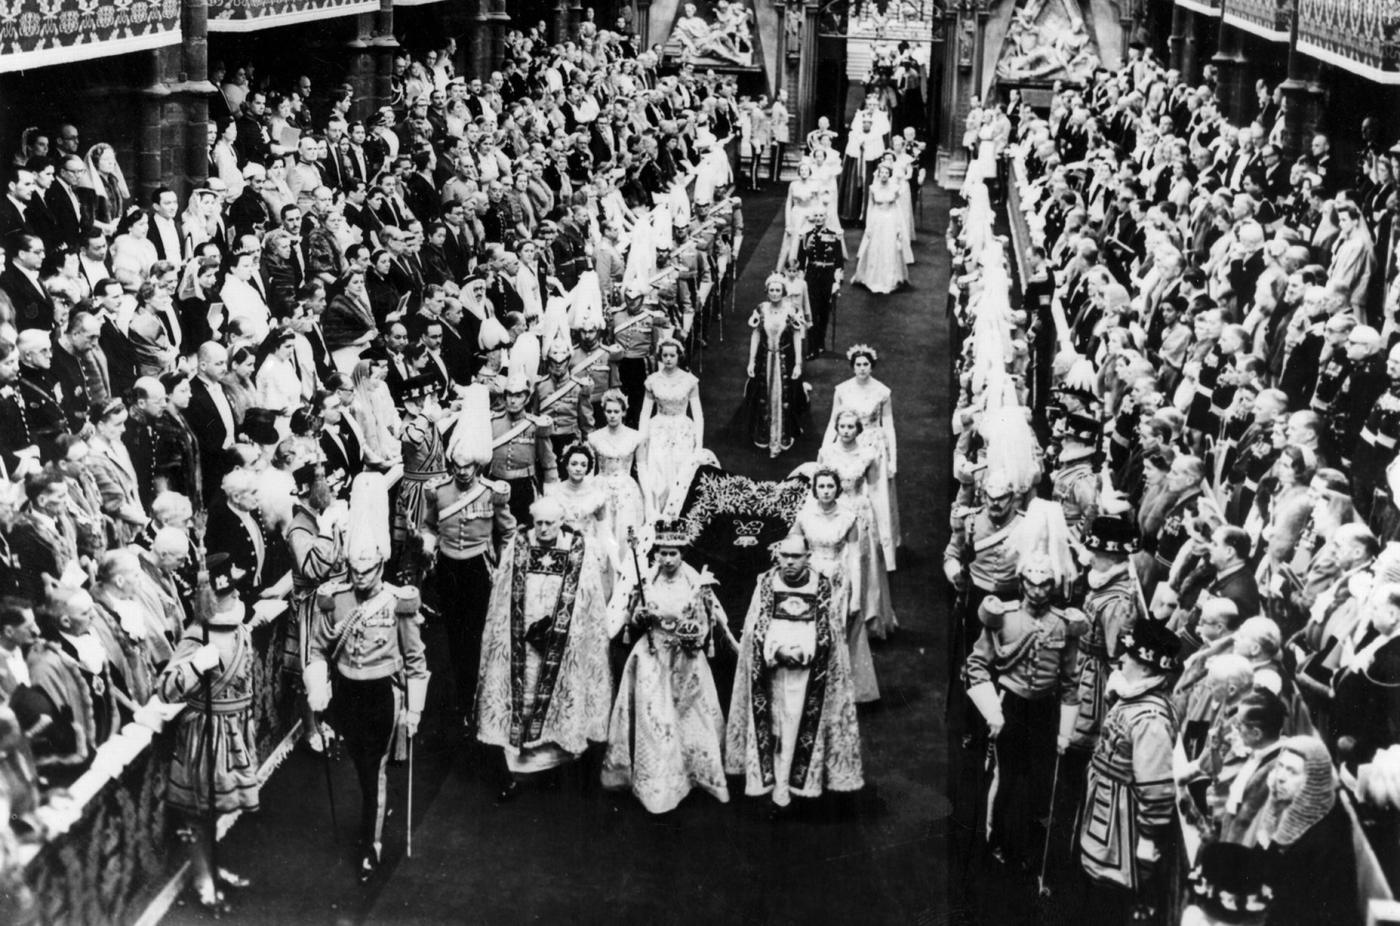 A processional down Westminster Abbey for the coronation of Queen Elizabeth II